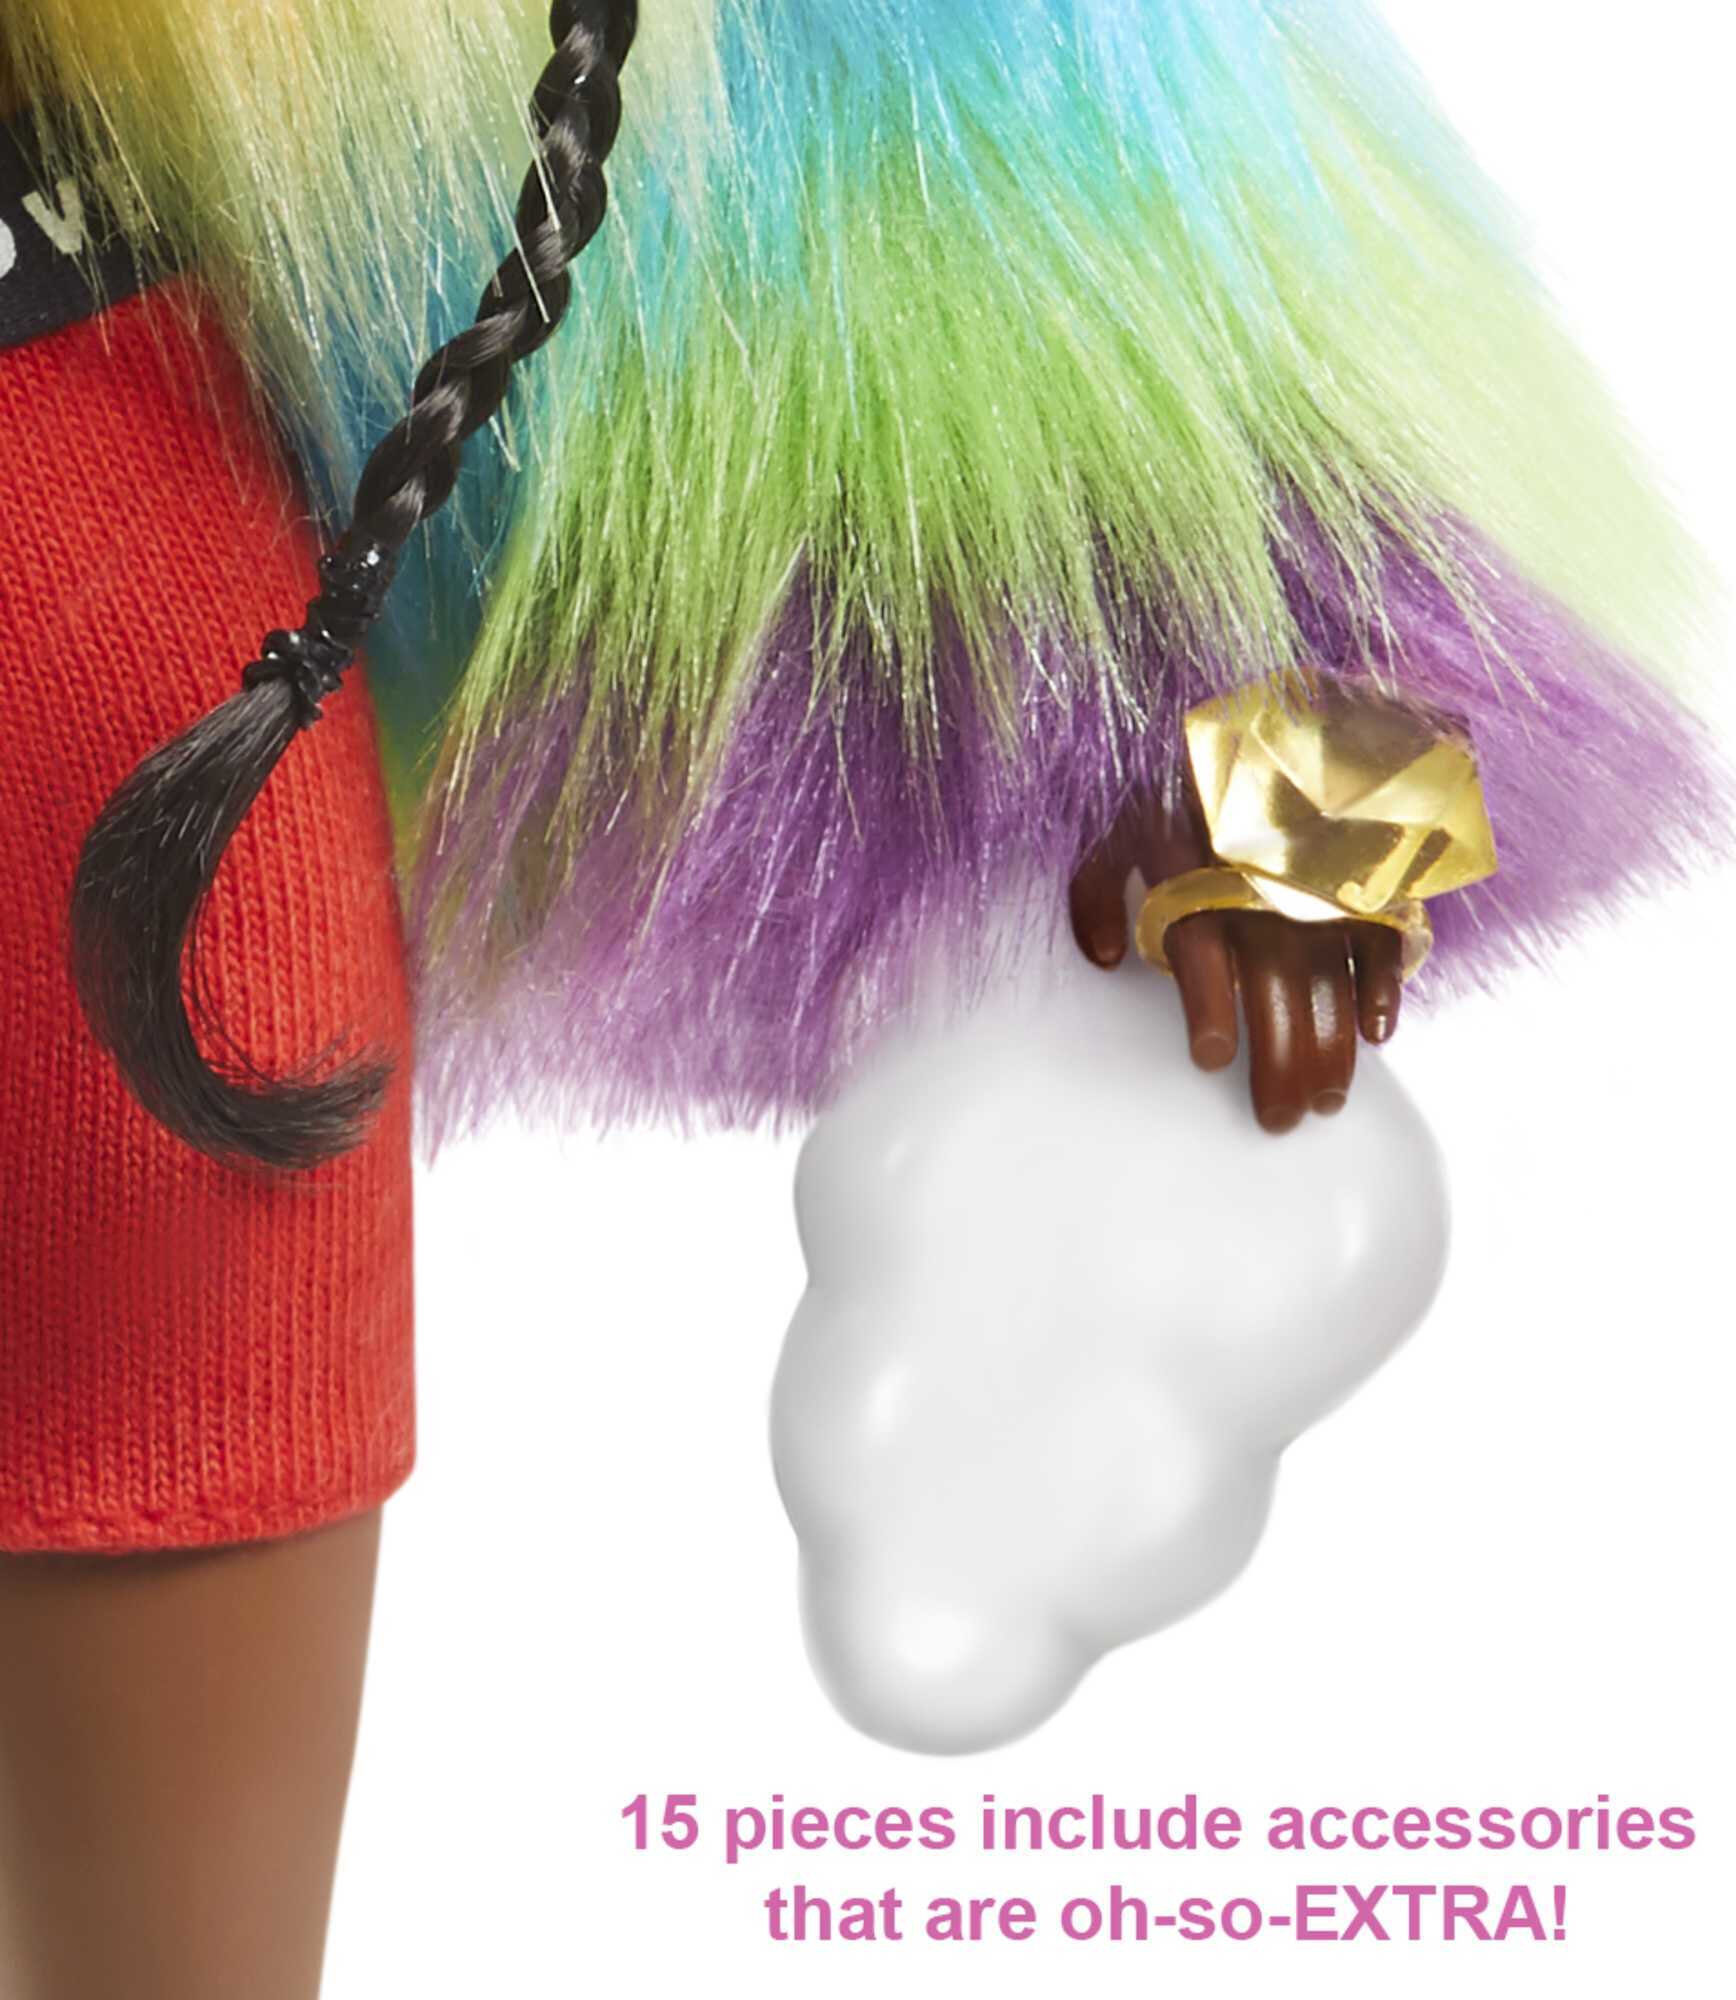 Barbie Extra Fashion Doll with Afro-Puffs in Shaggy Rainbow Coat with Accessories & Pet - image 5 of 8